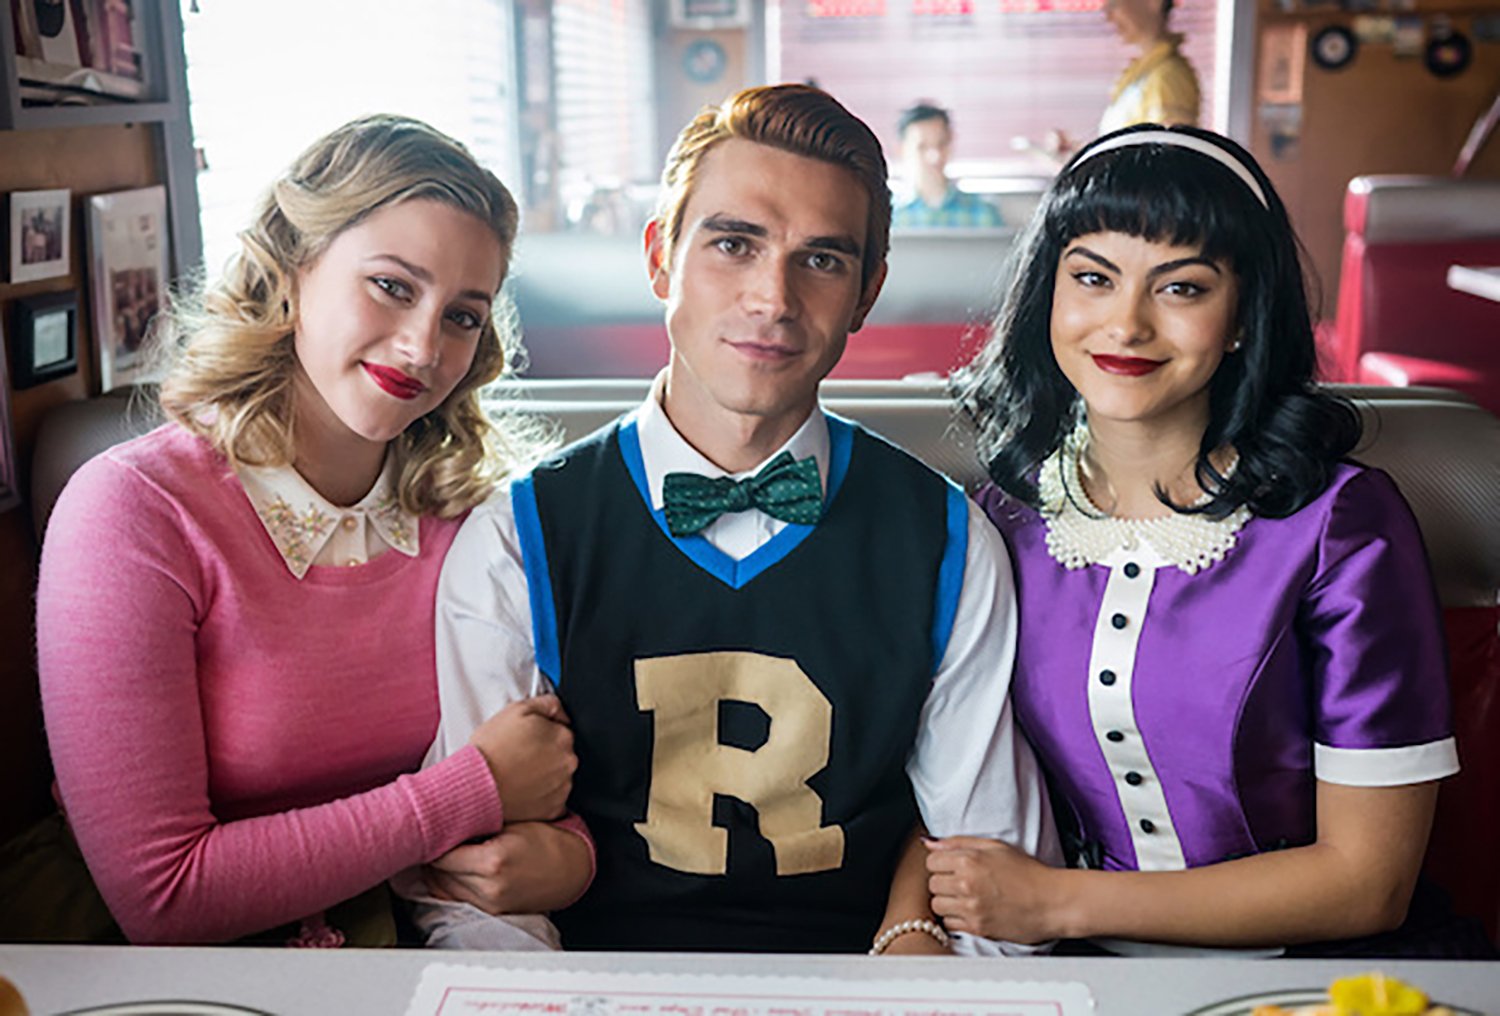 'Riverdale' stars Lili Reinhart, KJ Apa and Camila Mendes sit in a diner in a production still. Here's what to watch after 'Riverdale' ends.